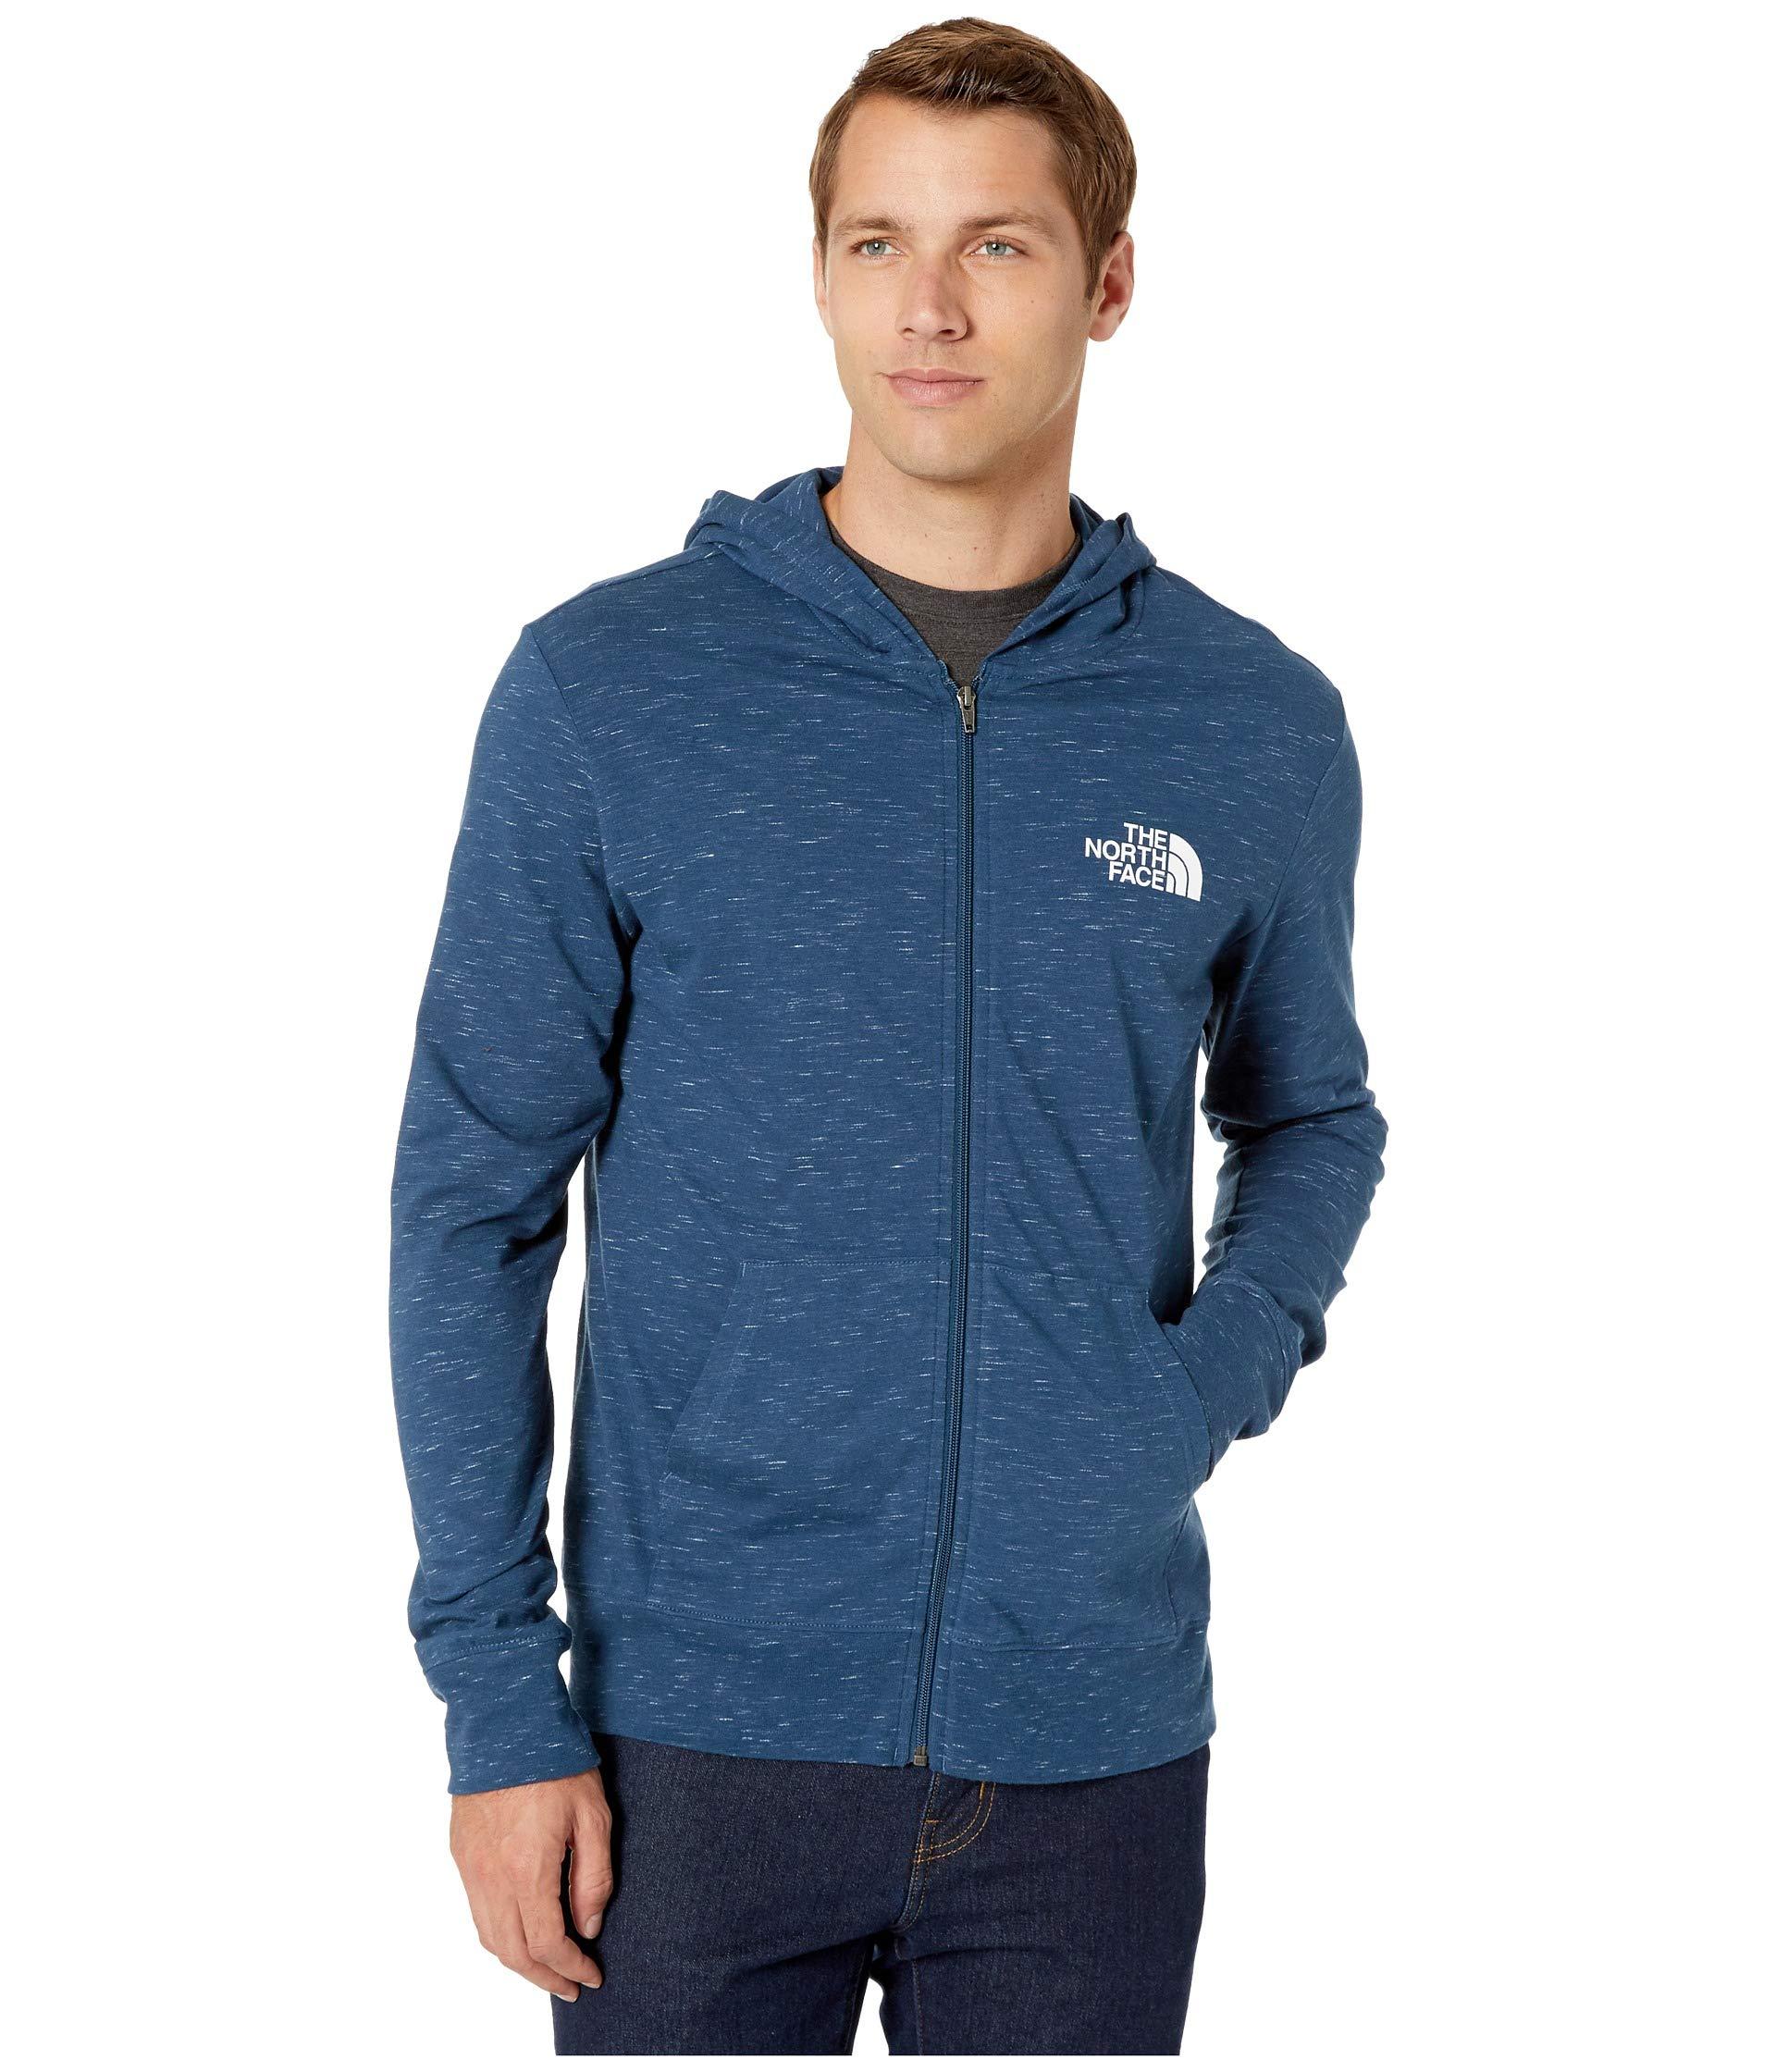 The North Face Boxed Out Injected Full Zip in Blue for Men - Lyst